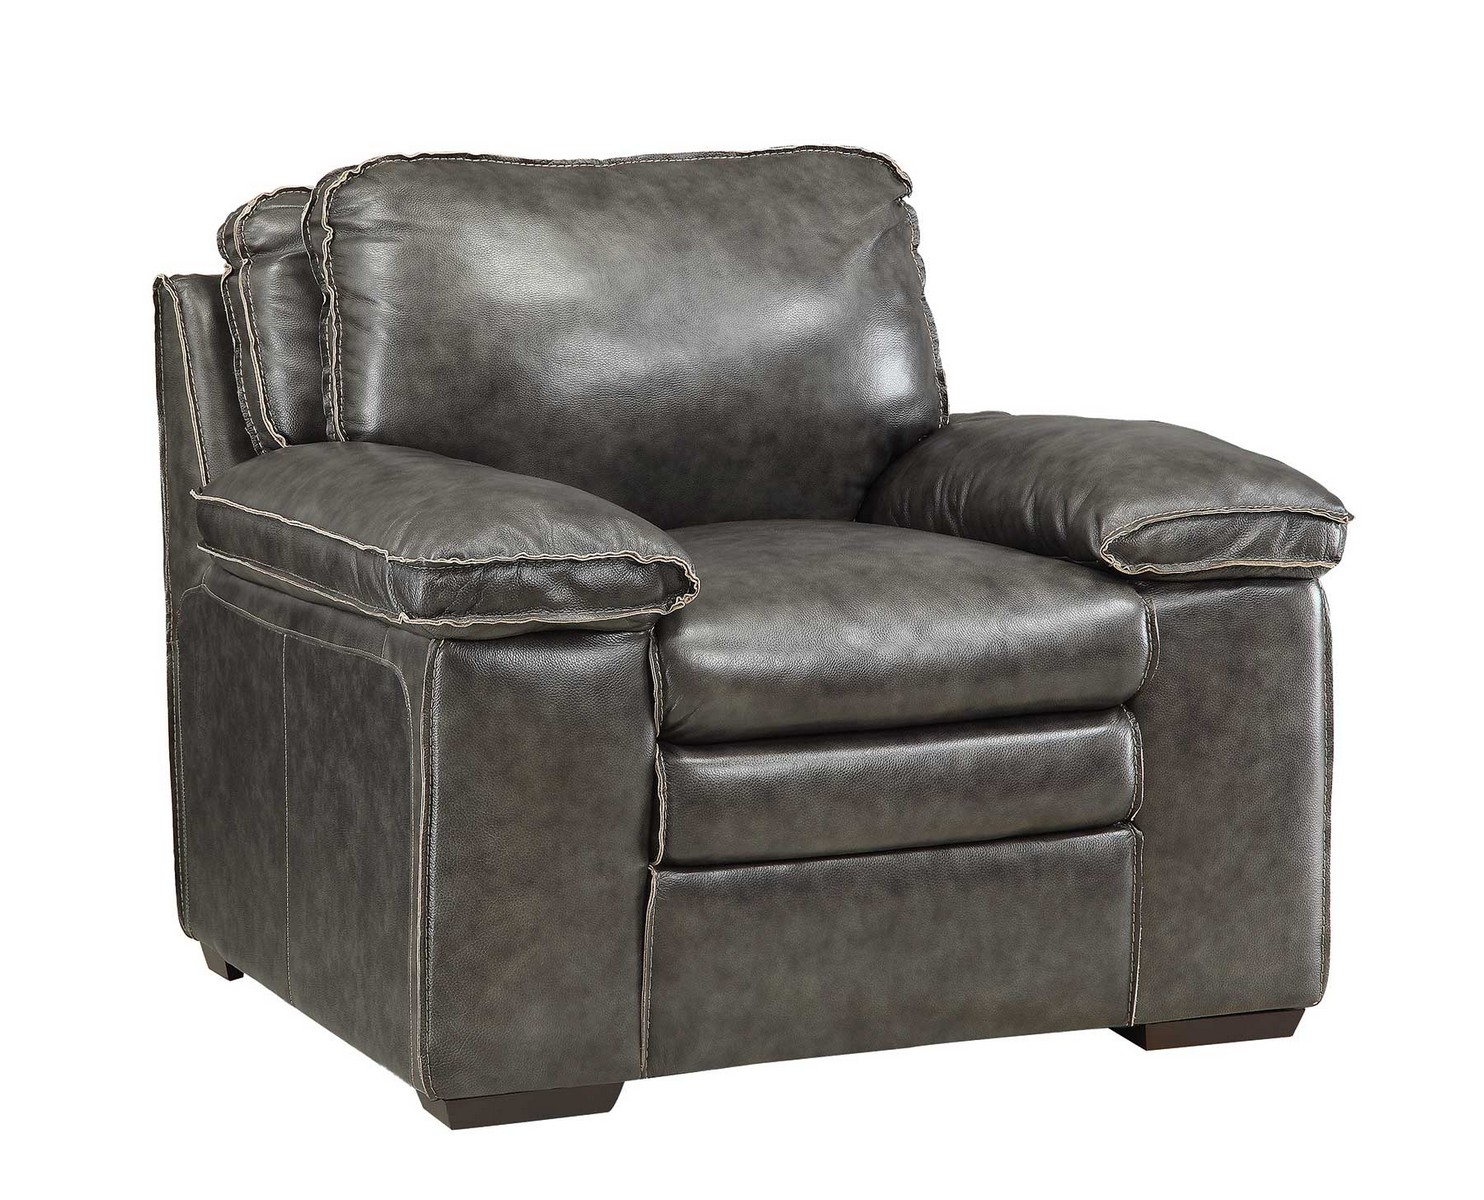 Coaster Regalvale Chair - Two-tone Charcoal